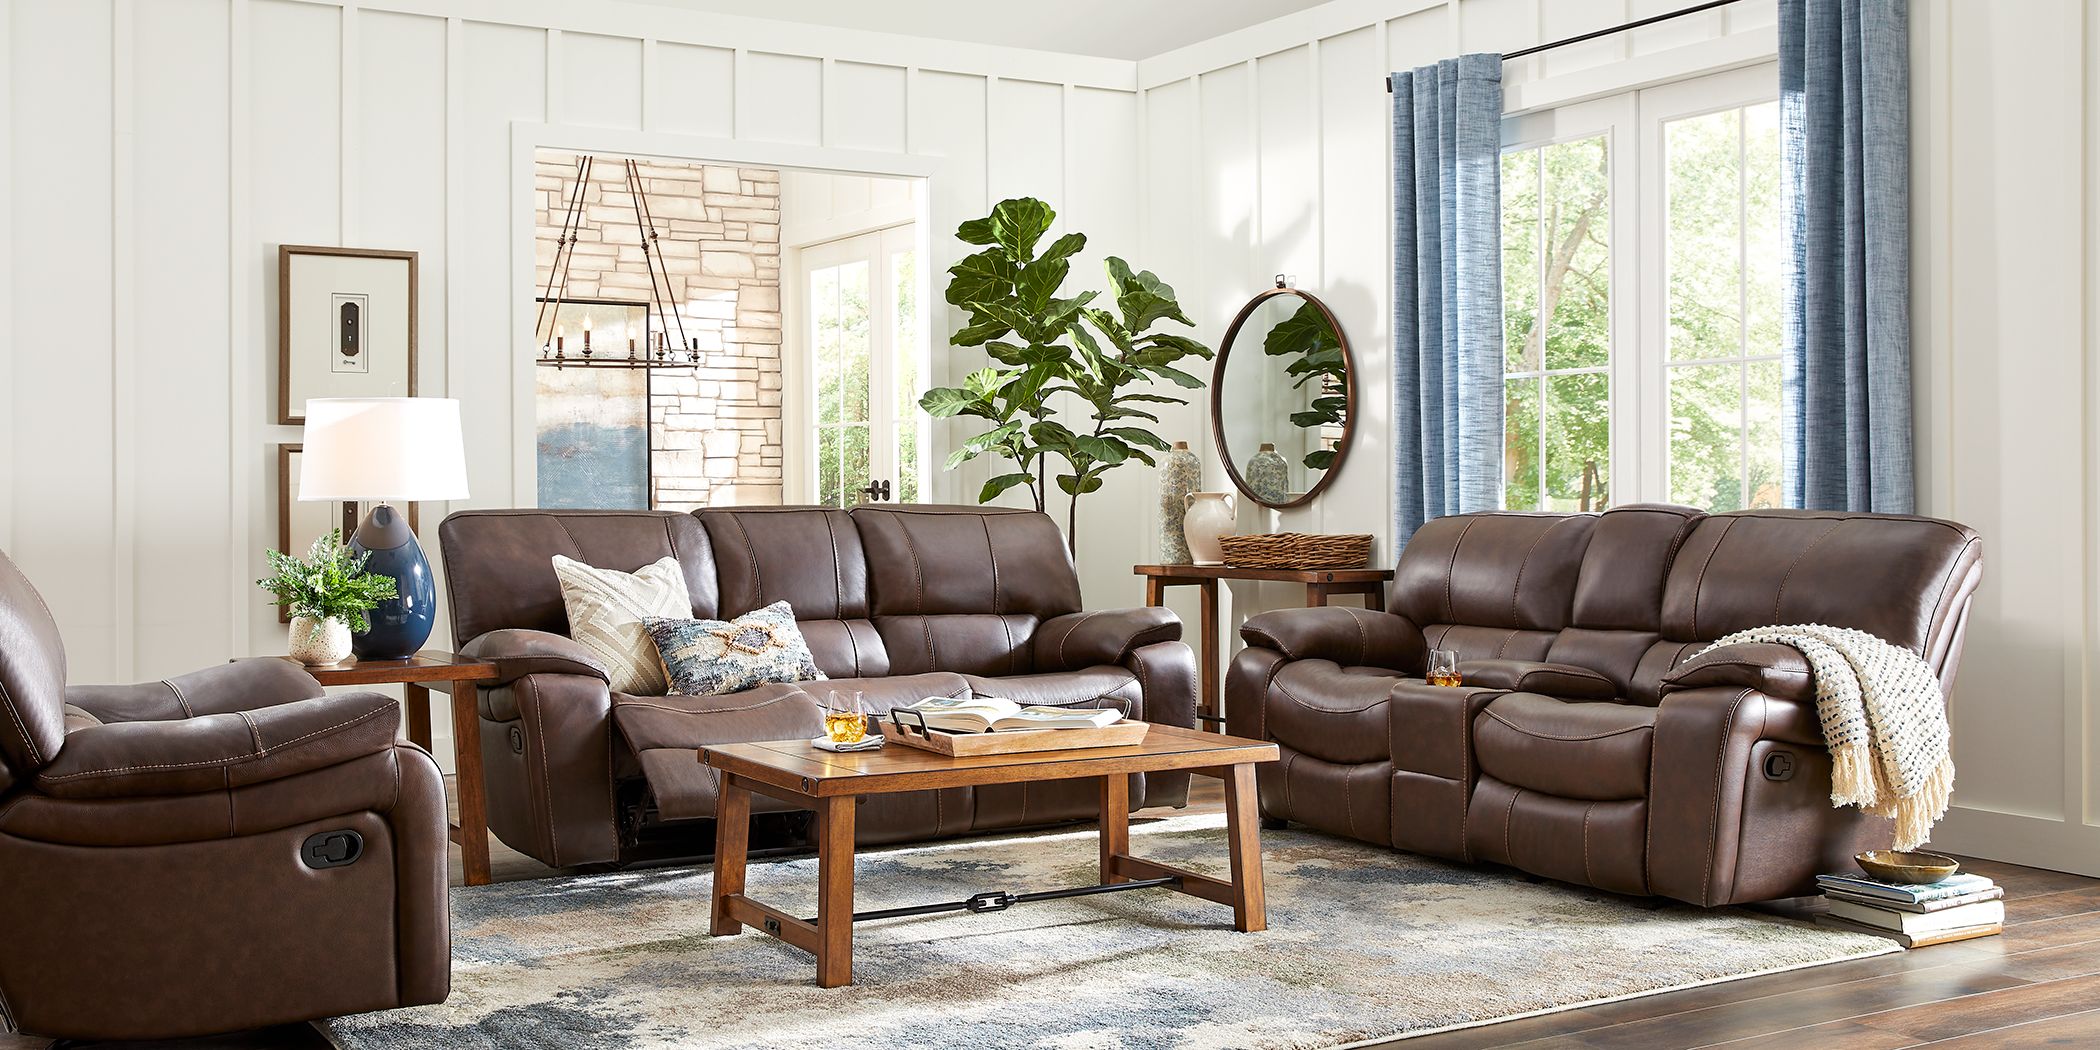 Cindy Crawford Home Leather Furniture, Cindy Crawford Home Calvano Brown Leather 3 Pc Living Room